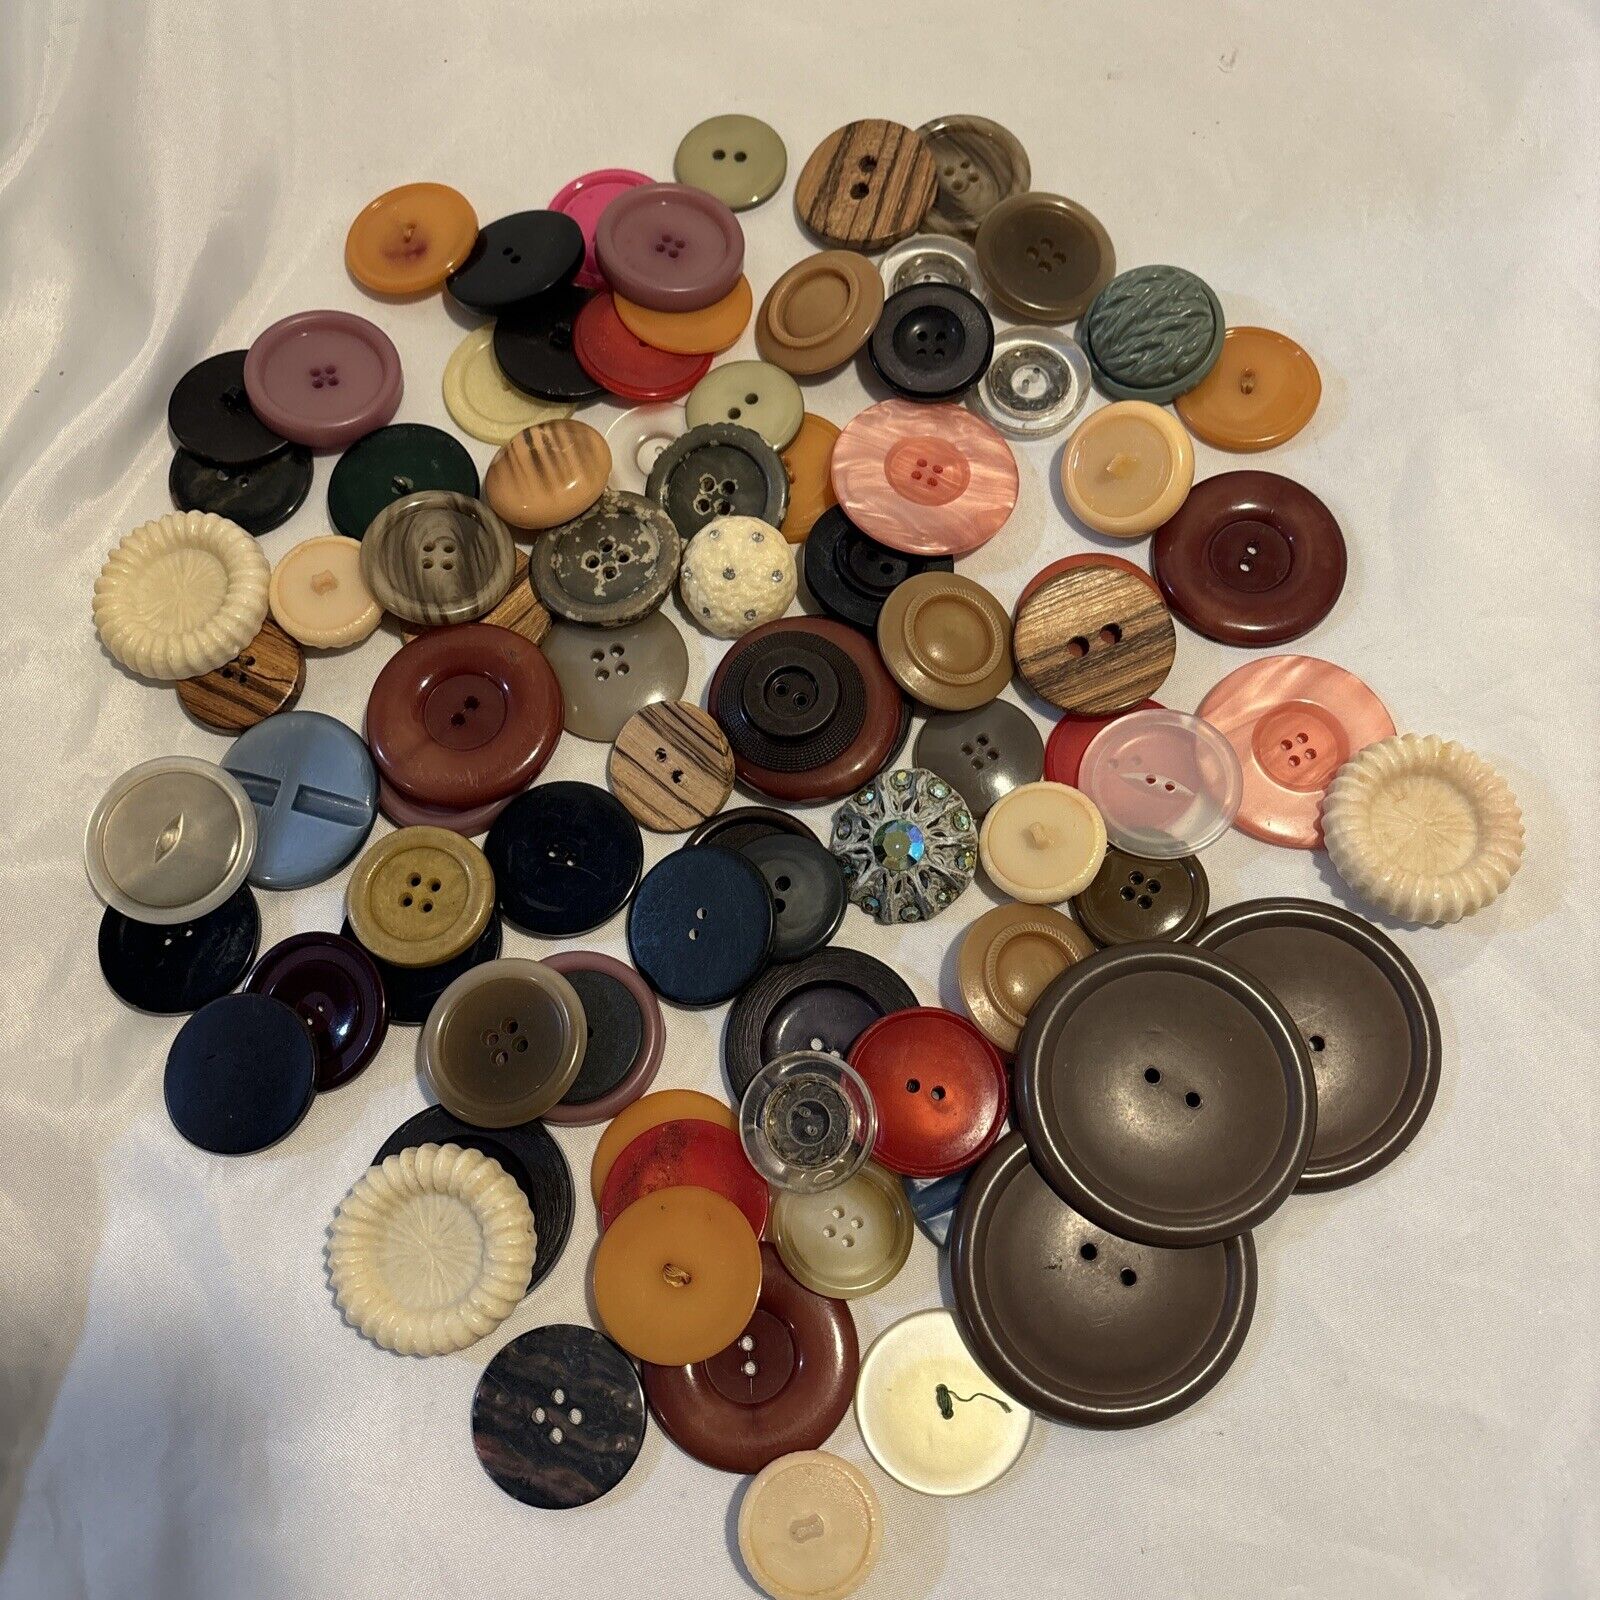 Lot of Assorted Large Vintage Buttons - 1 lb